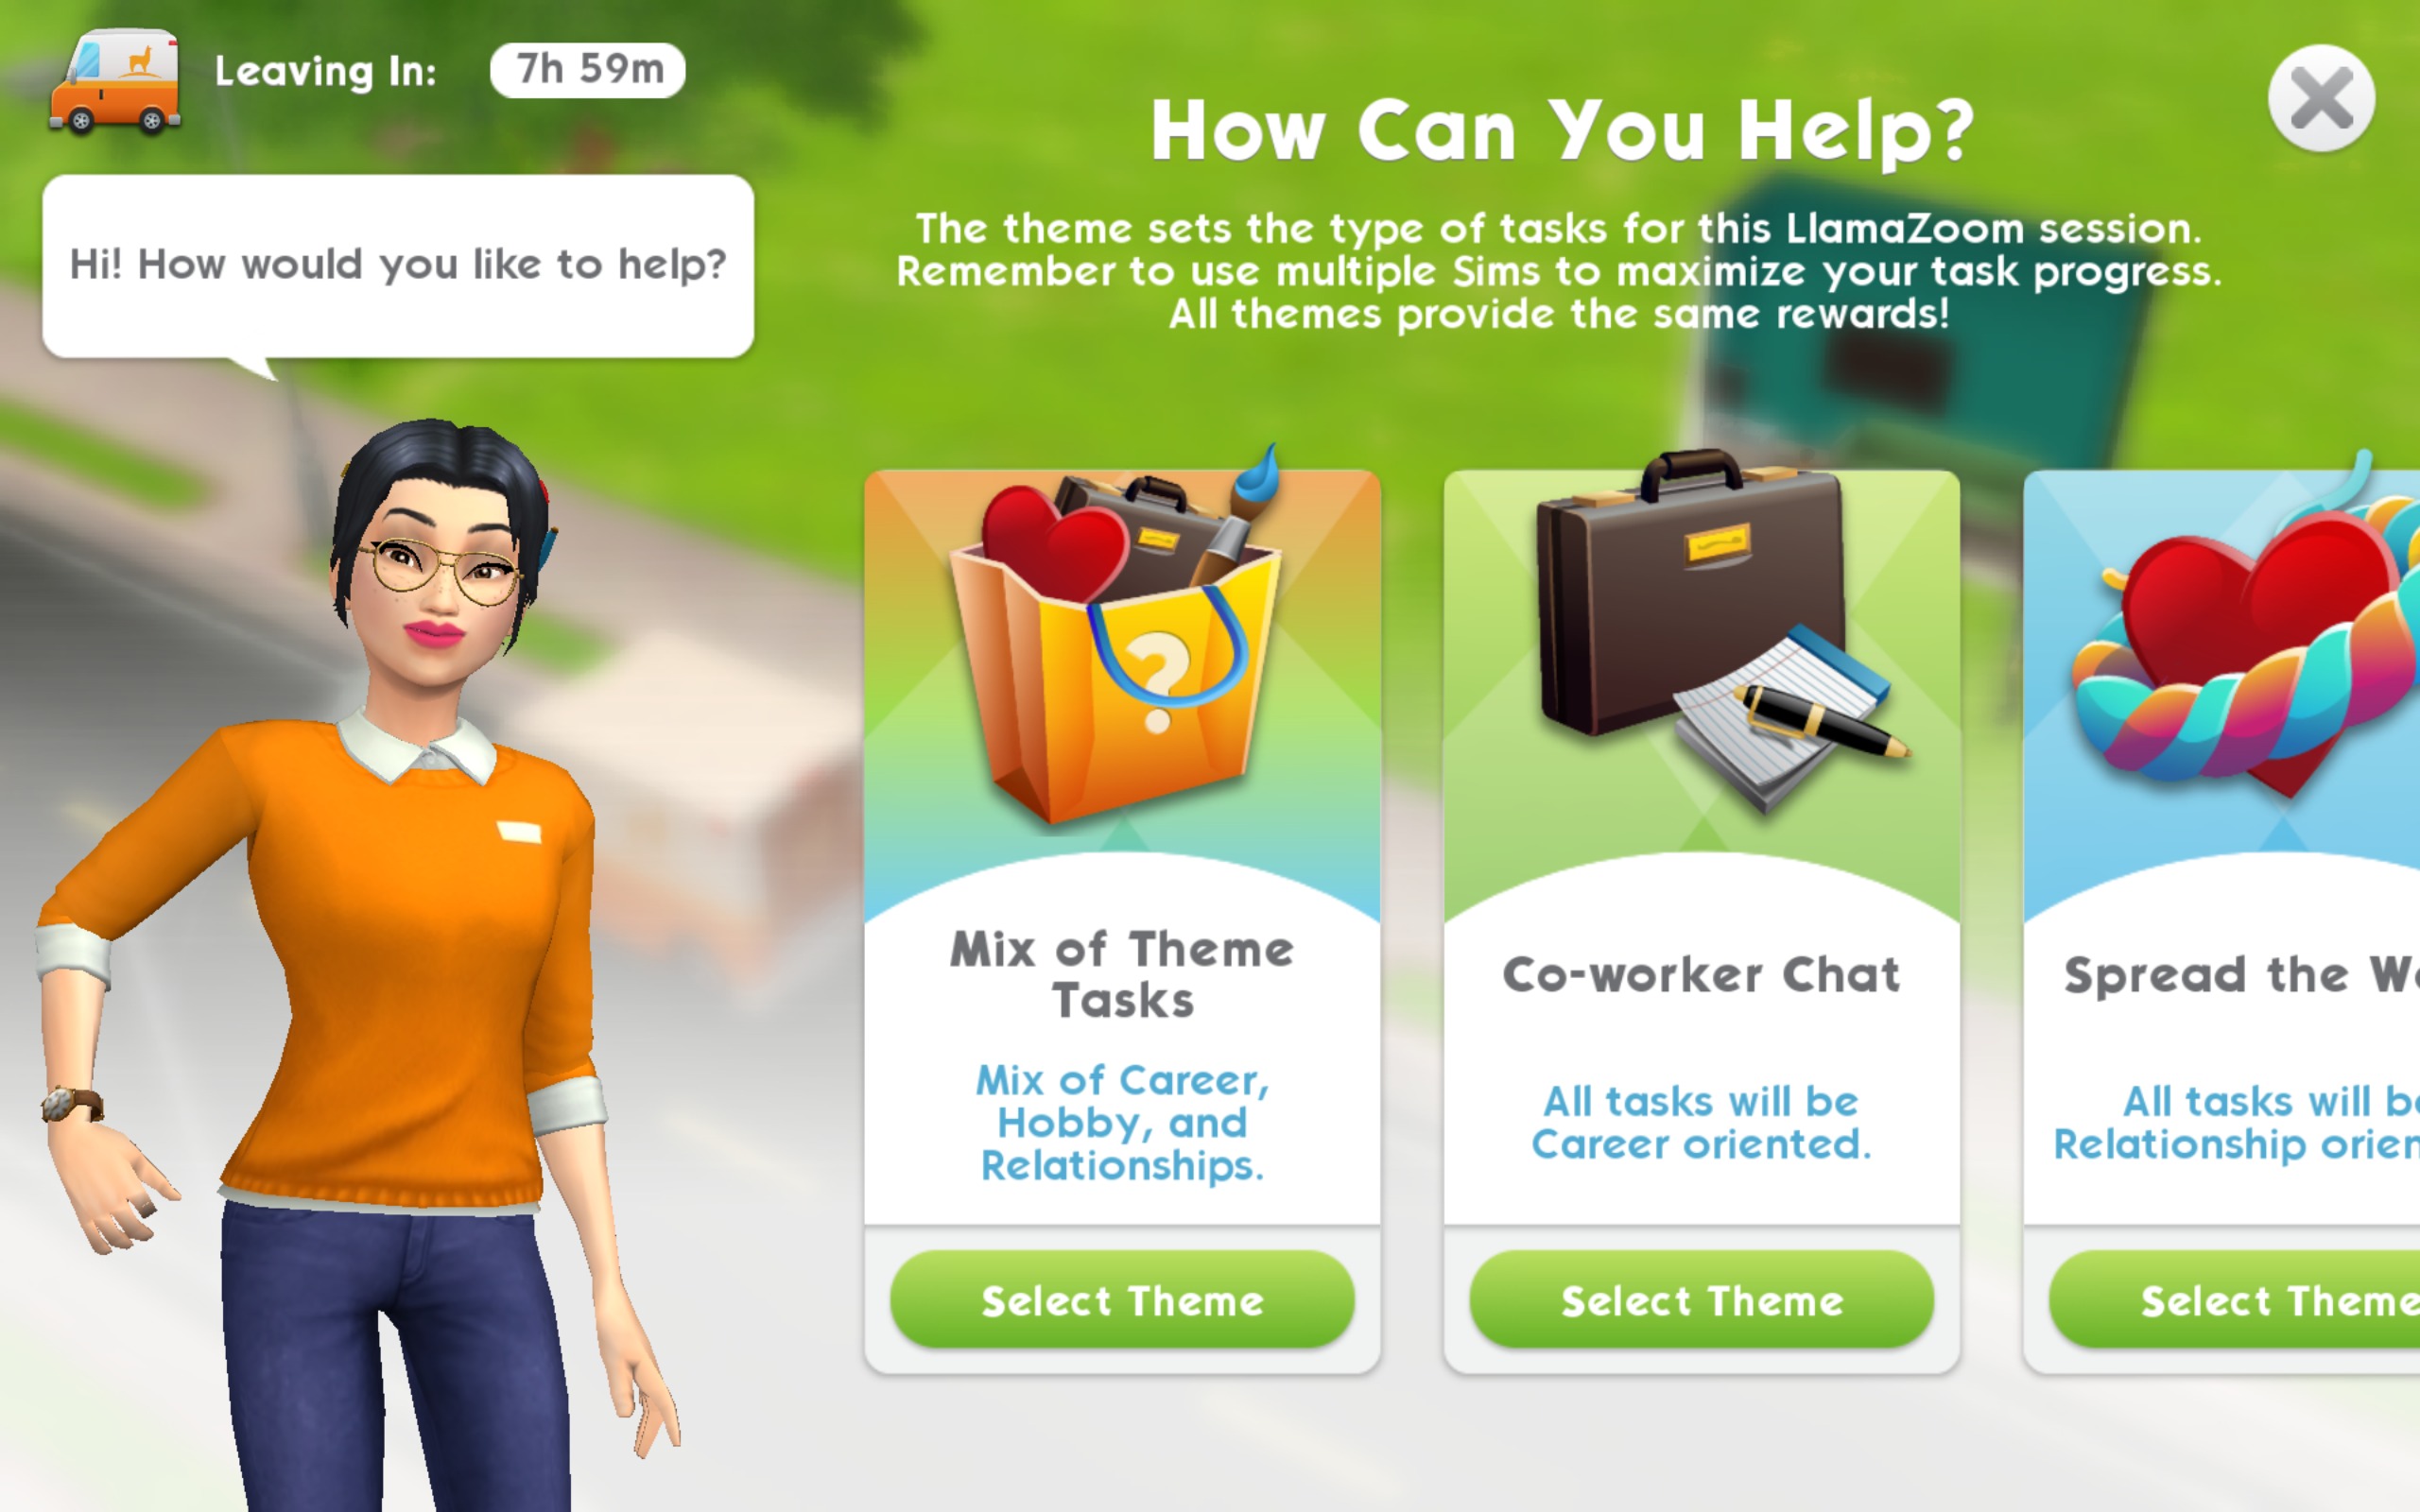 The Sims Mobile: Waterfront District, New Careers, and New Lots Now  Available